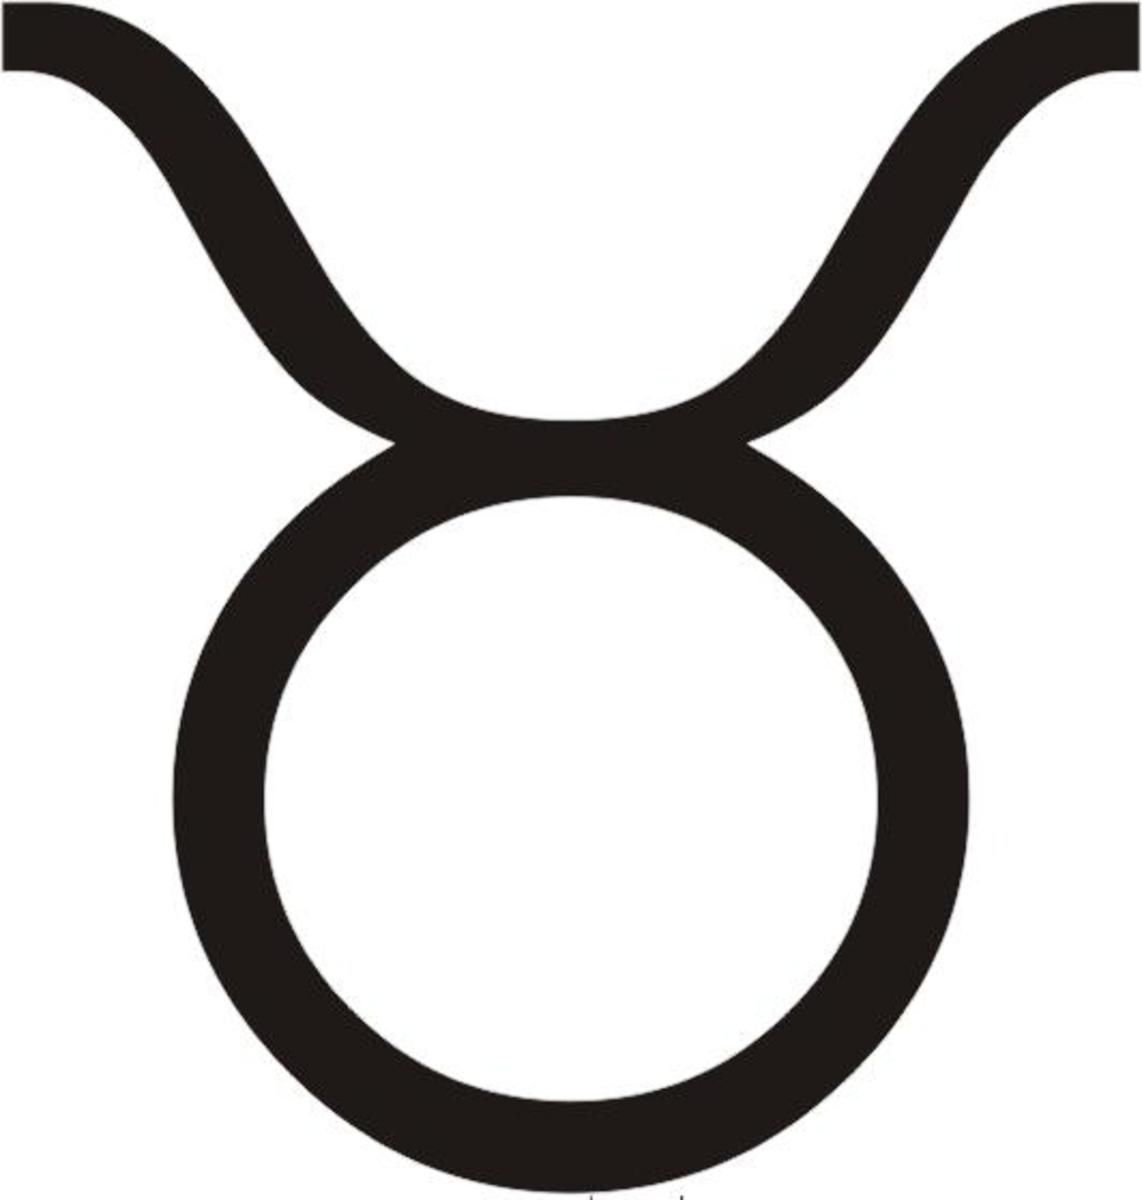 The Taurus glyph. The glyph is used as a symbol in identifying a zodiac sign, constellation, astrological planet, or the moon's nodes in a natal chart, also called the birth chart.